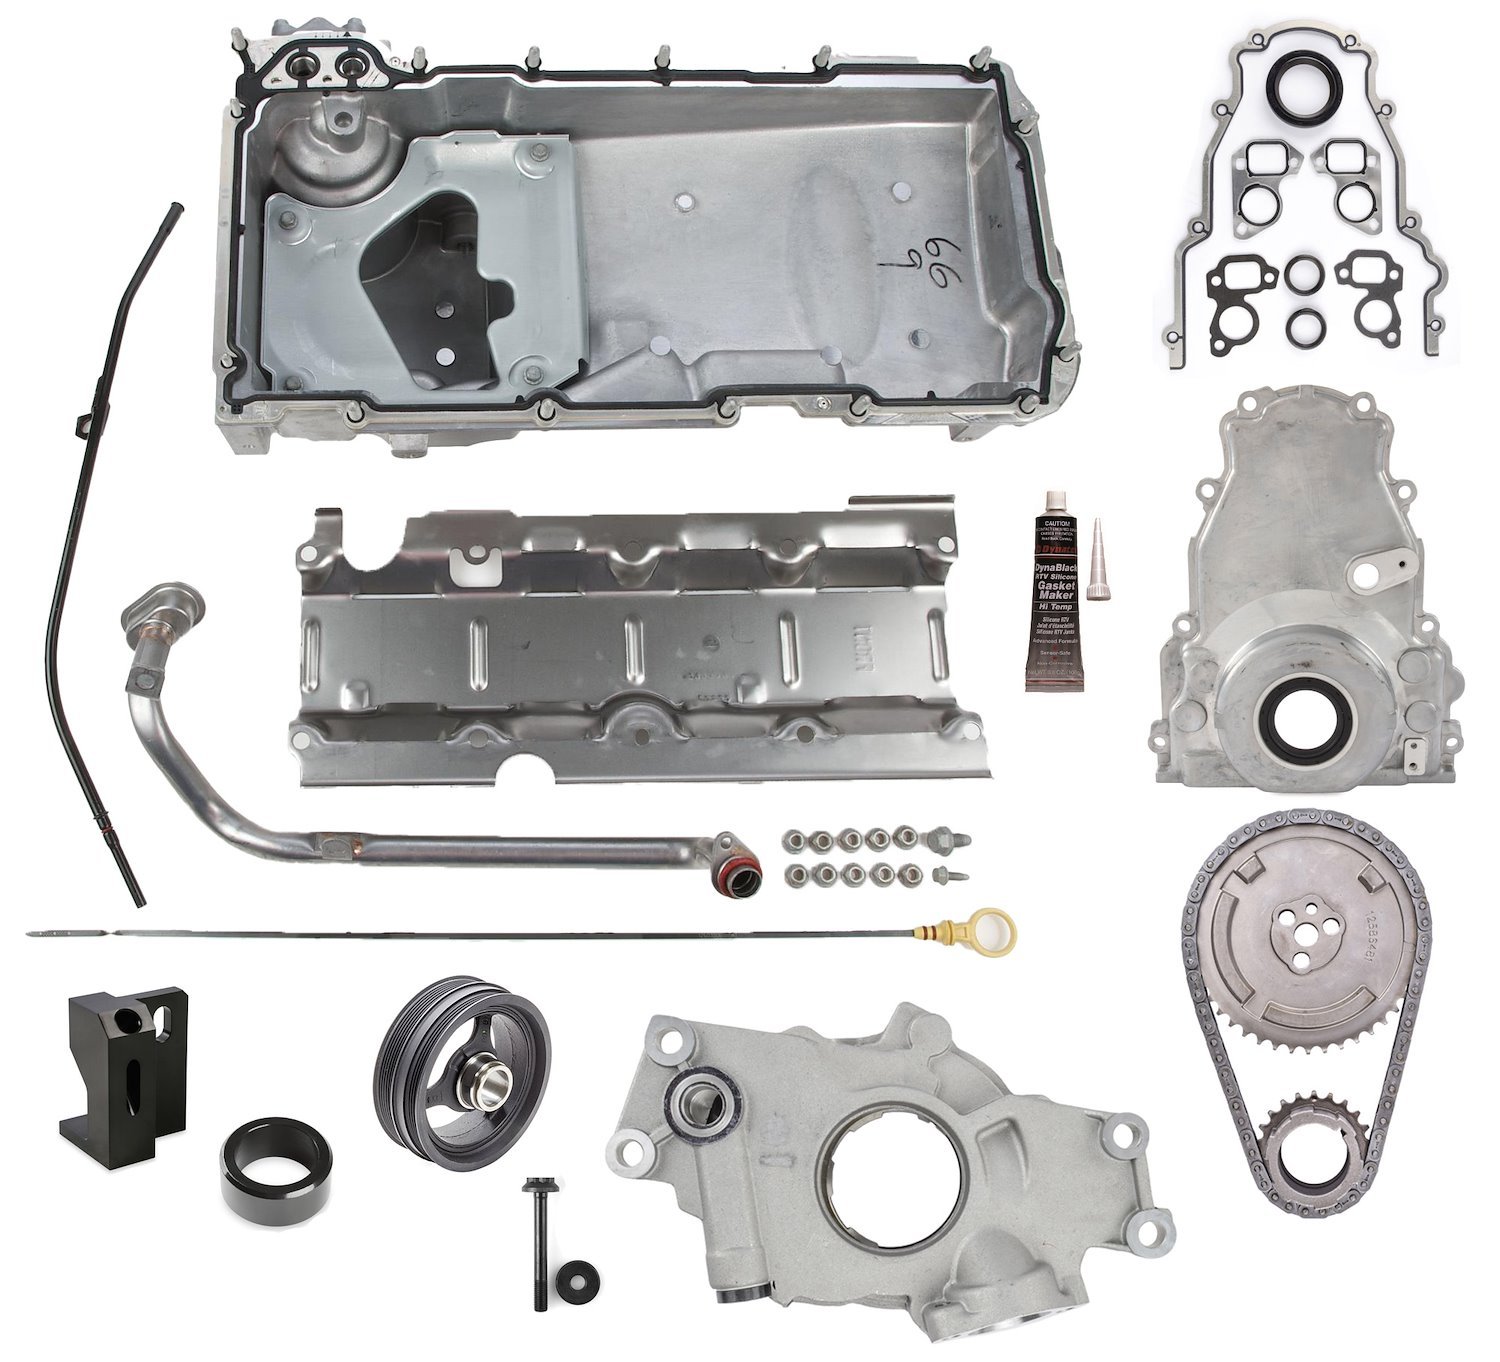 Dry-to-Wet Sump Conversion Kit for GM LS7 7.0L V8